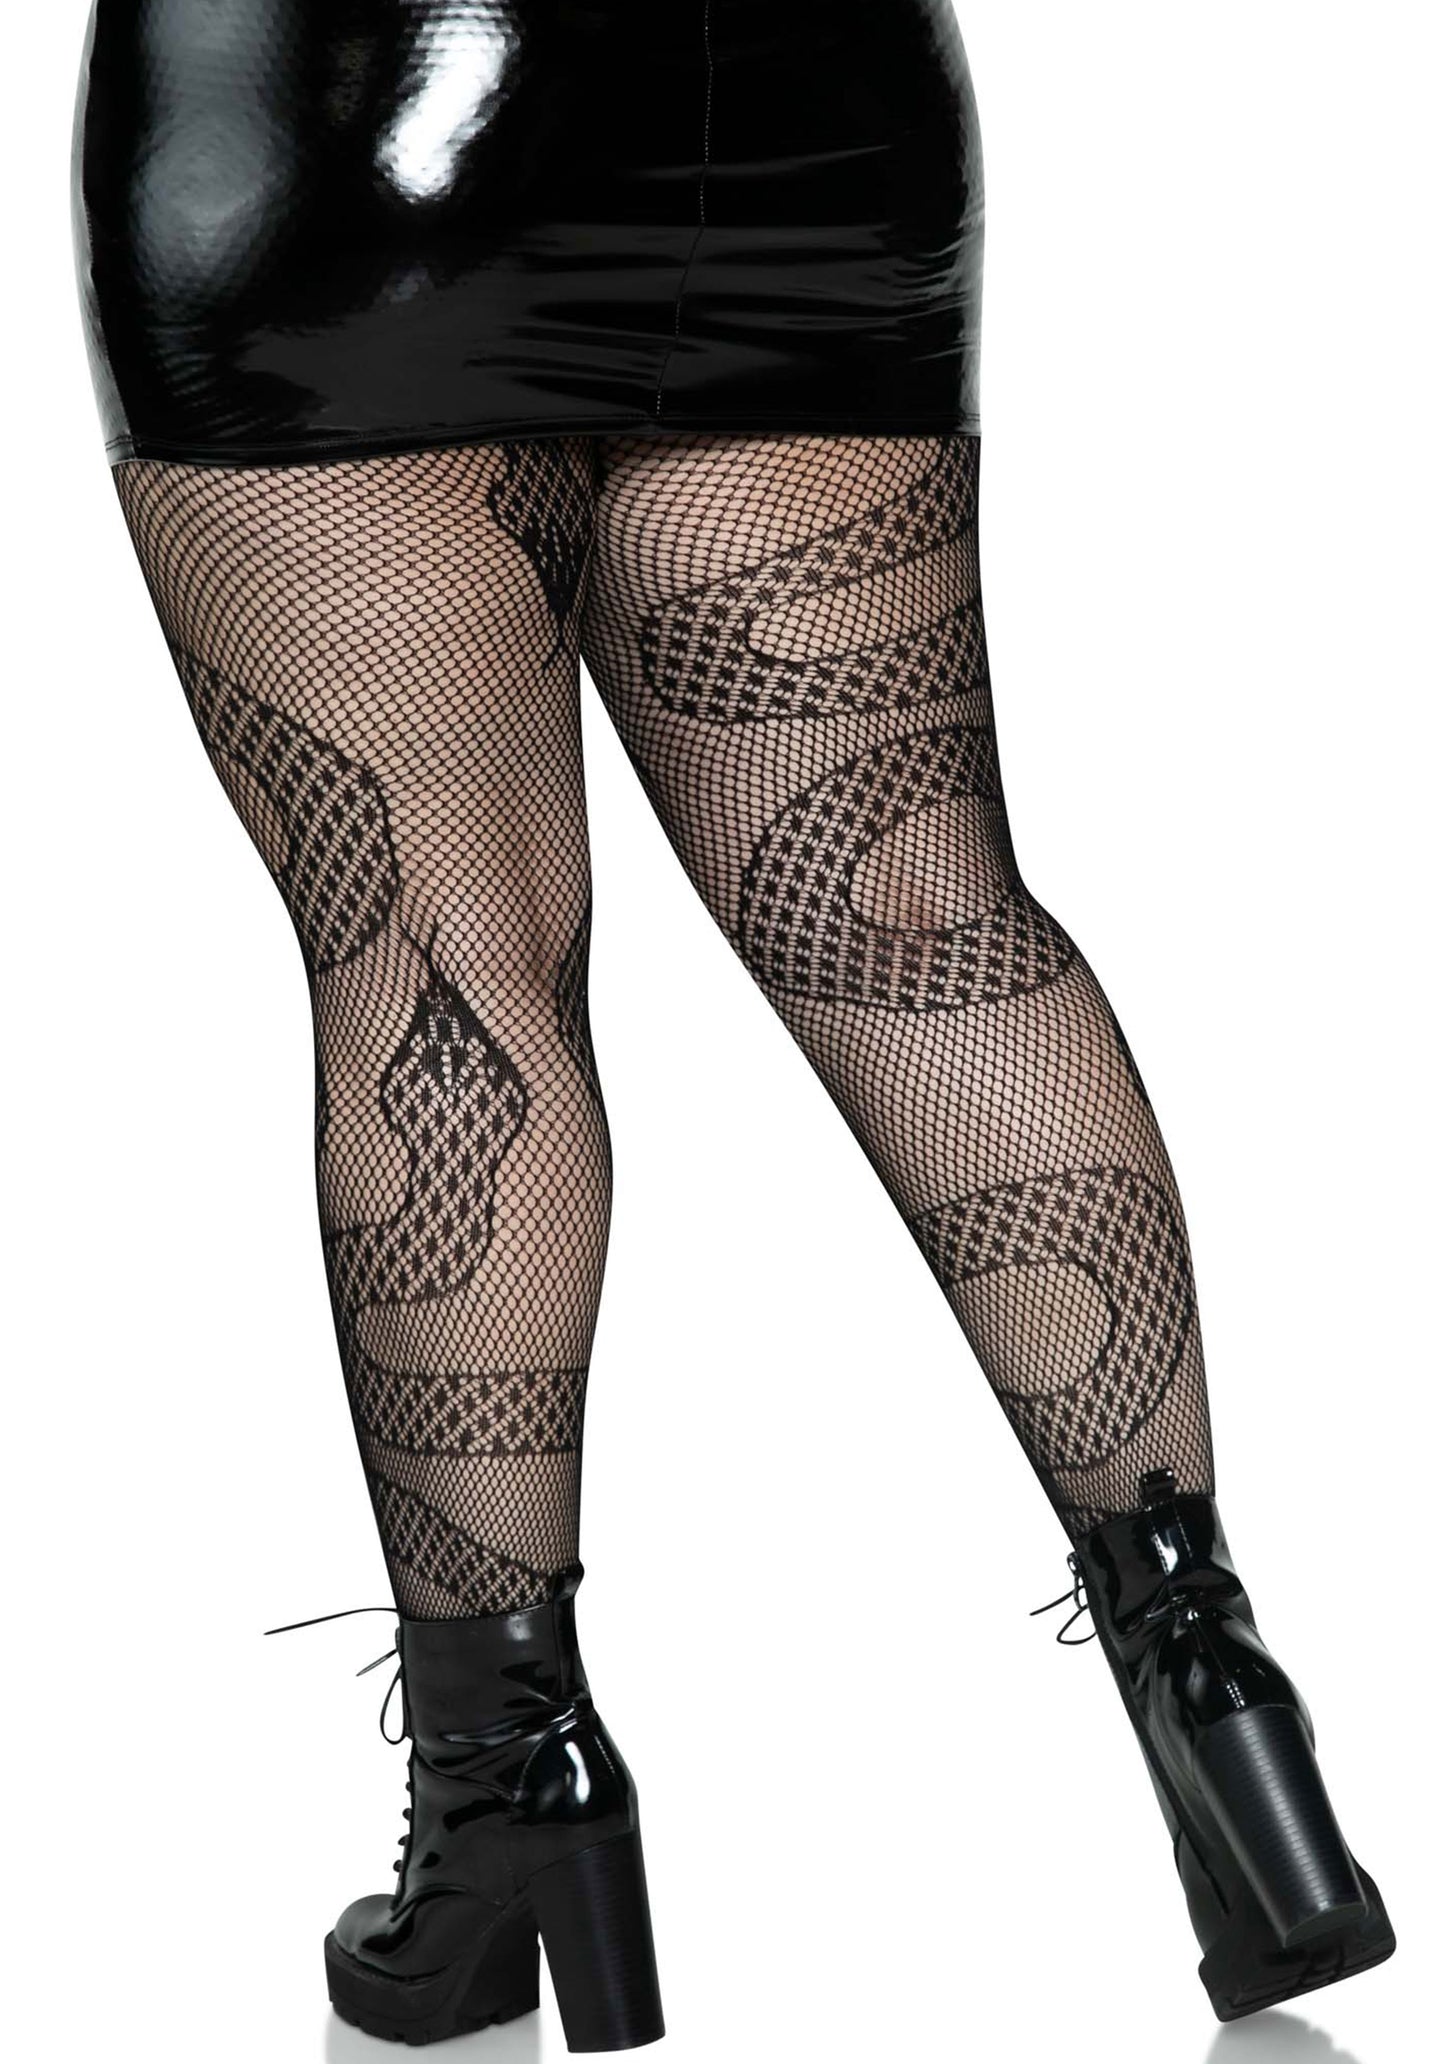 Leg Avenue 8143X Snake net tights - plus size black openwork fishnet tights with all over snakes